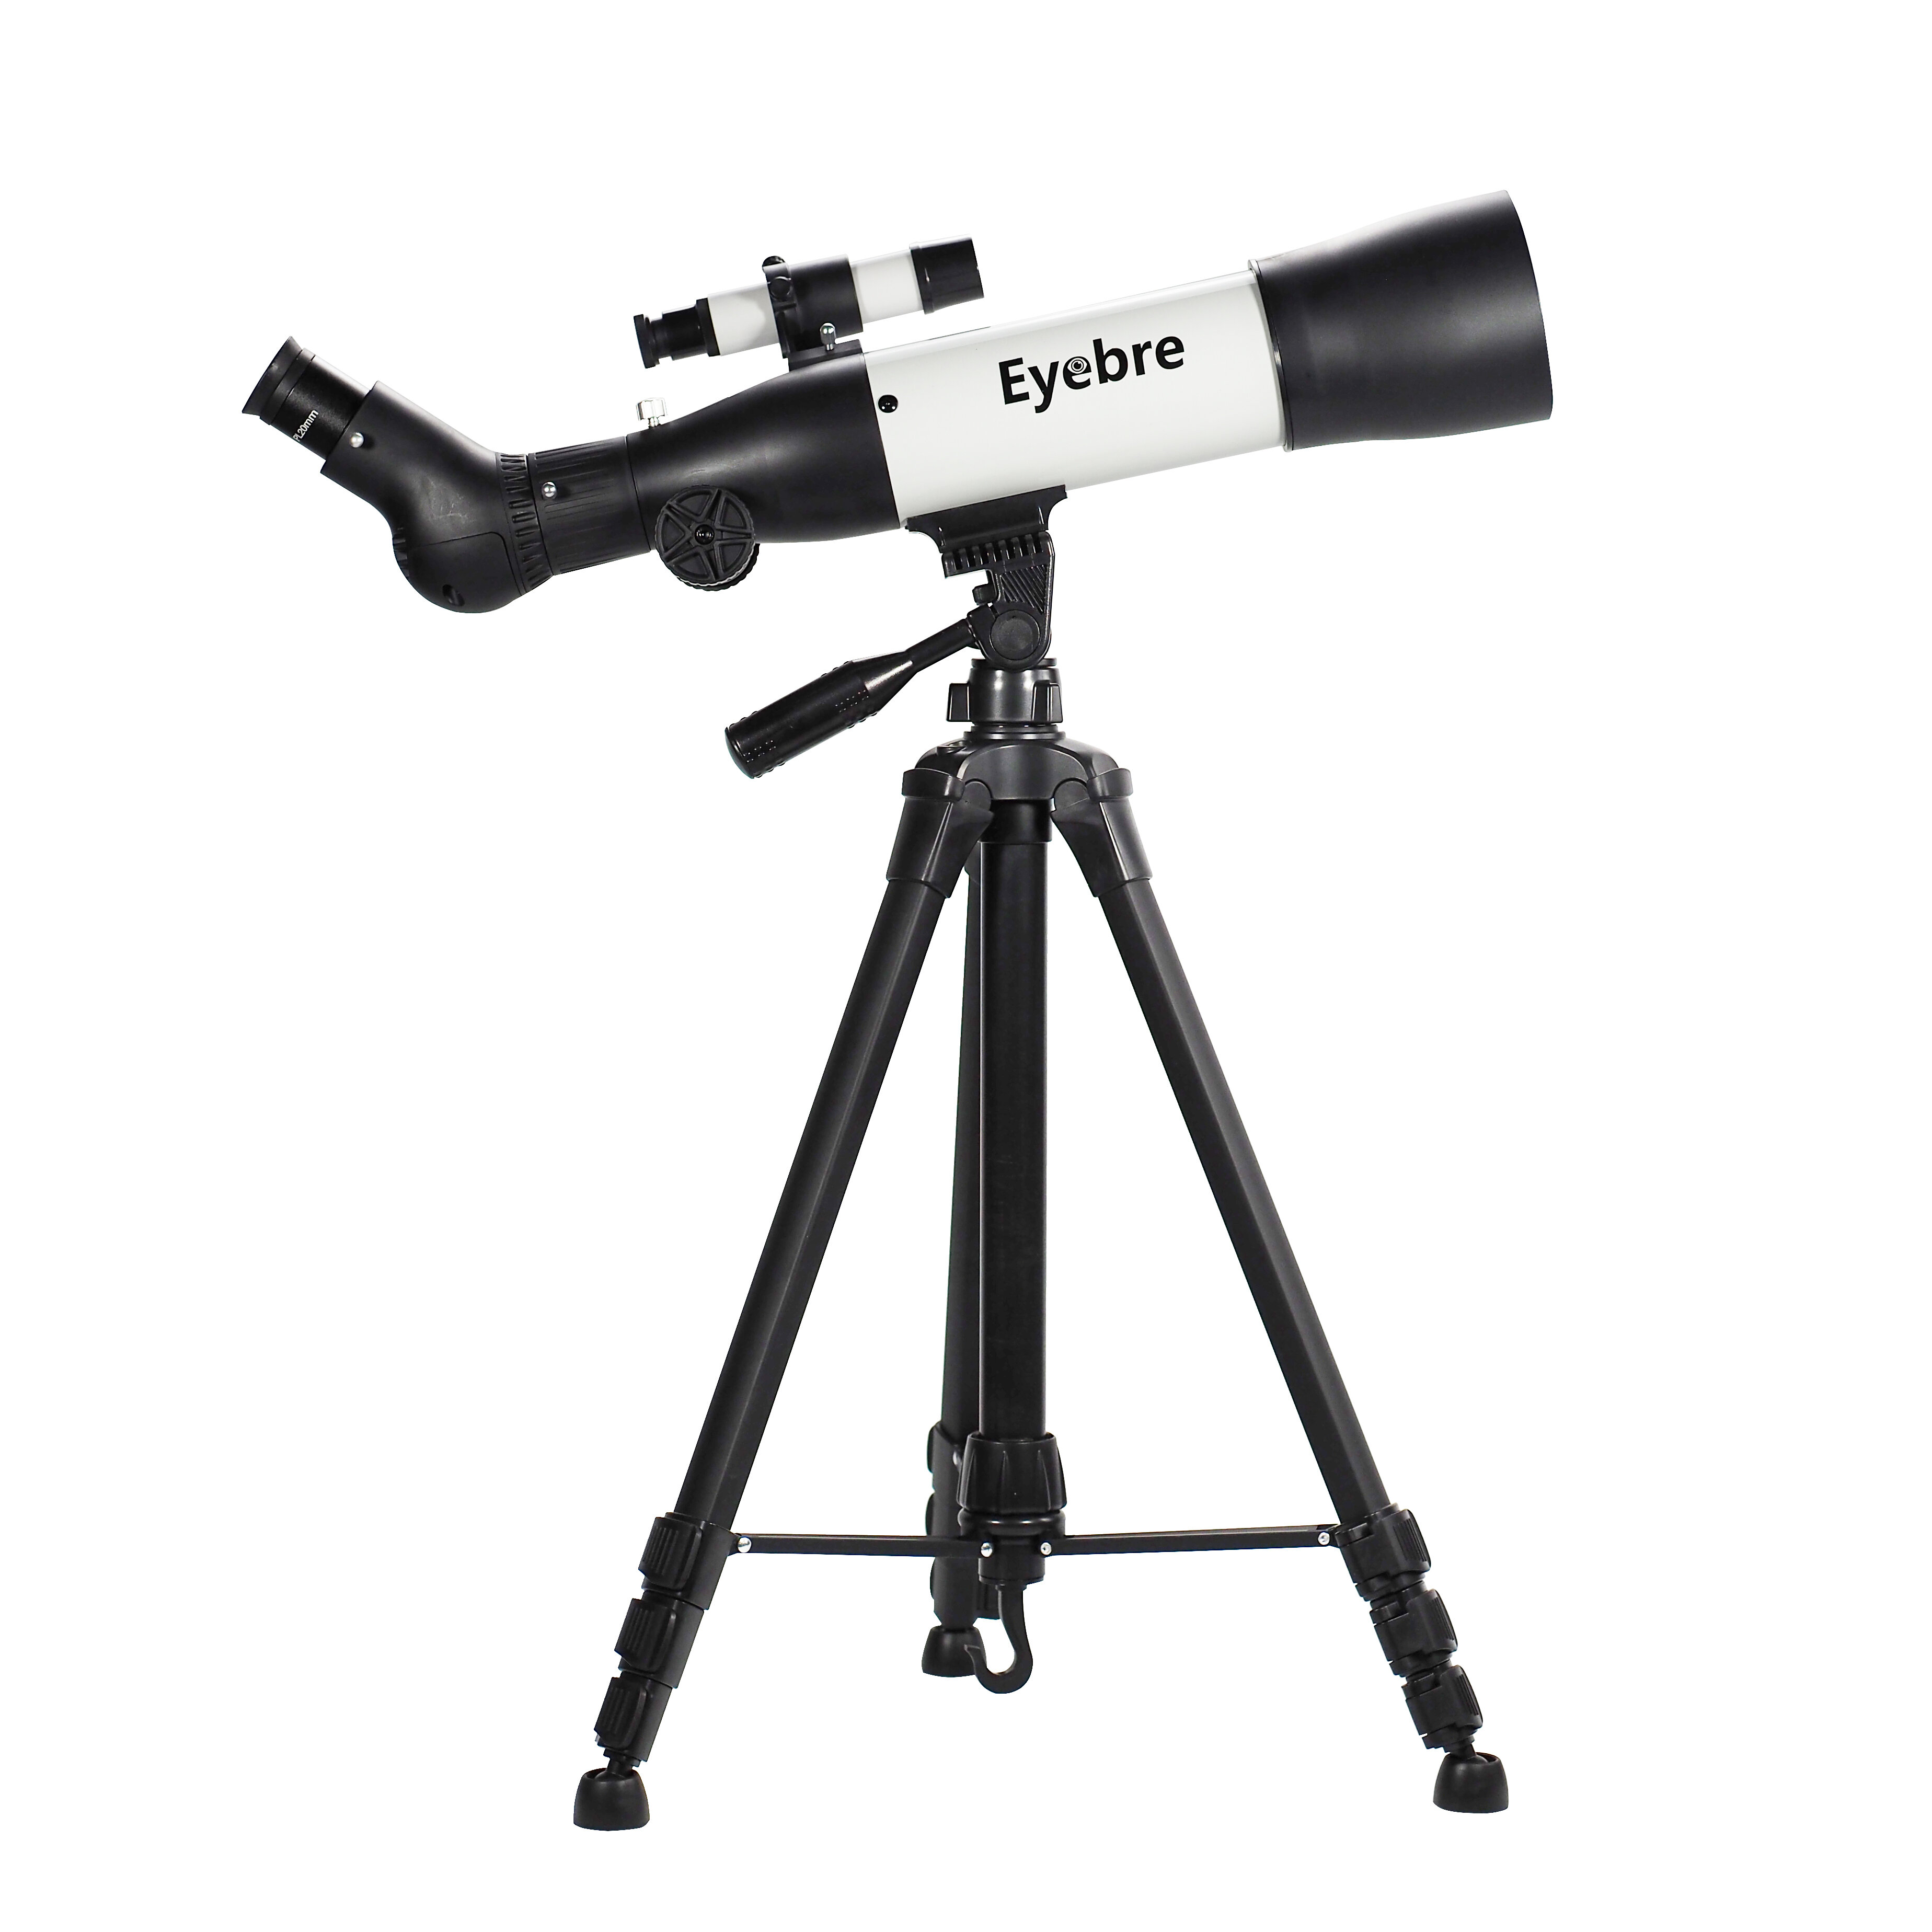 Eyebre HD 350X Astronomical Telescope High Magnification Professional Night Vision Deep Space Star View Moon Bird Watching Monocular Beginners Gift